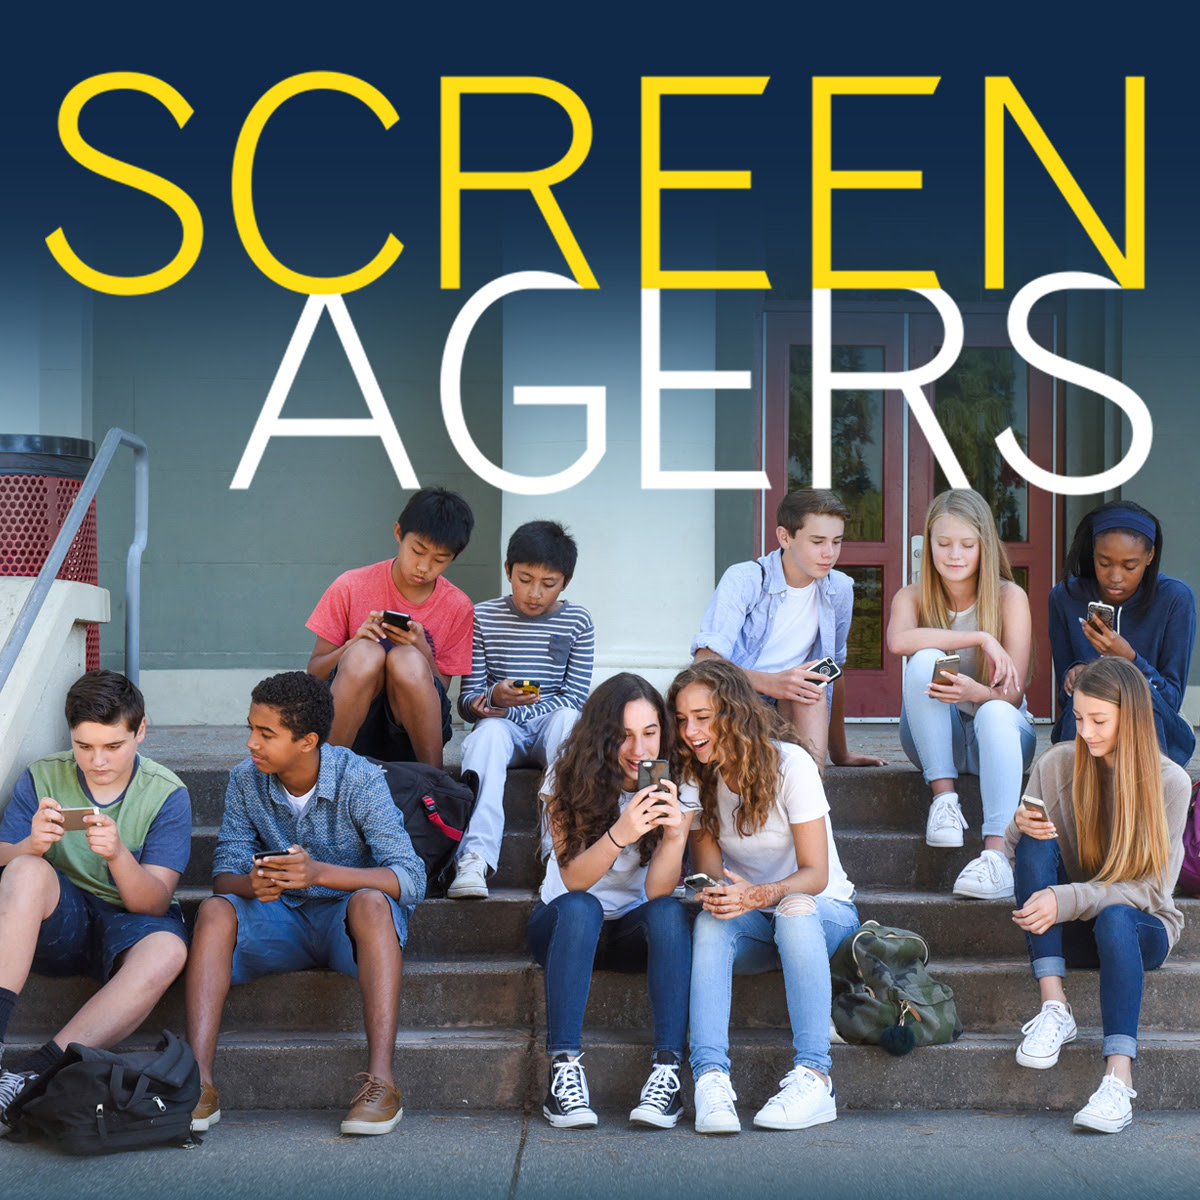 Screenagers Film Presented By Florence ISD